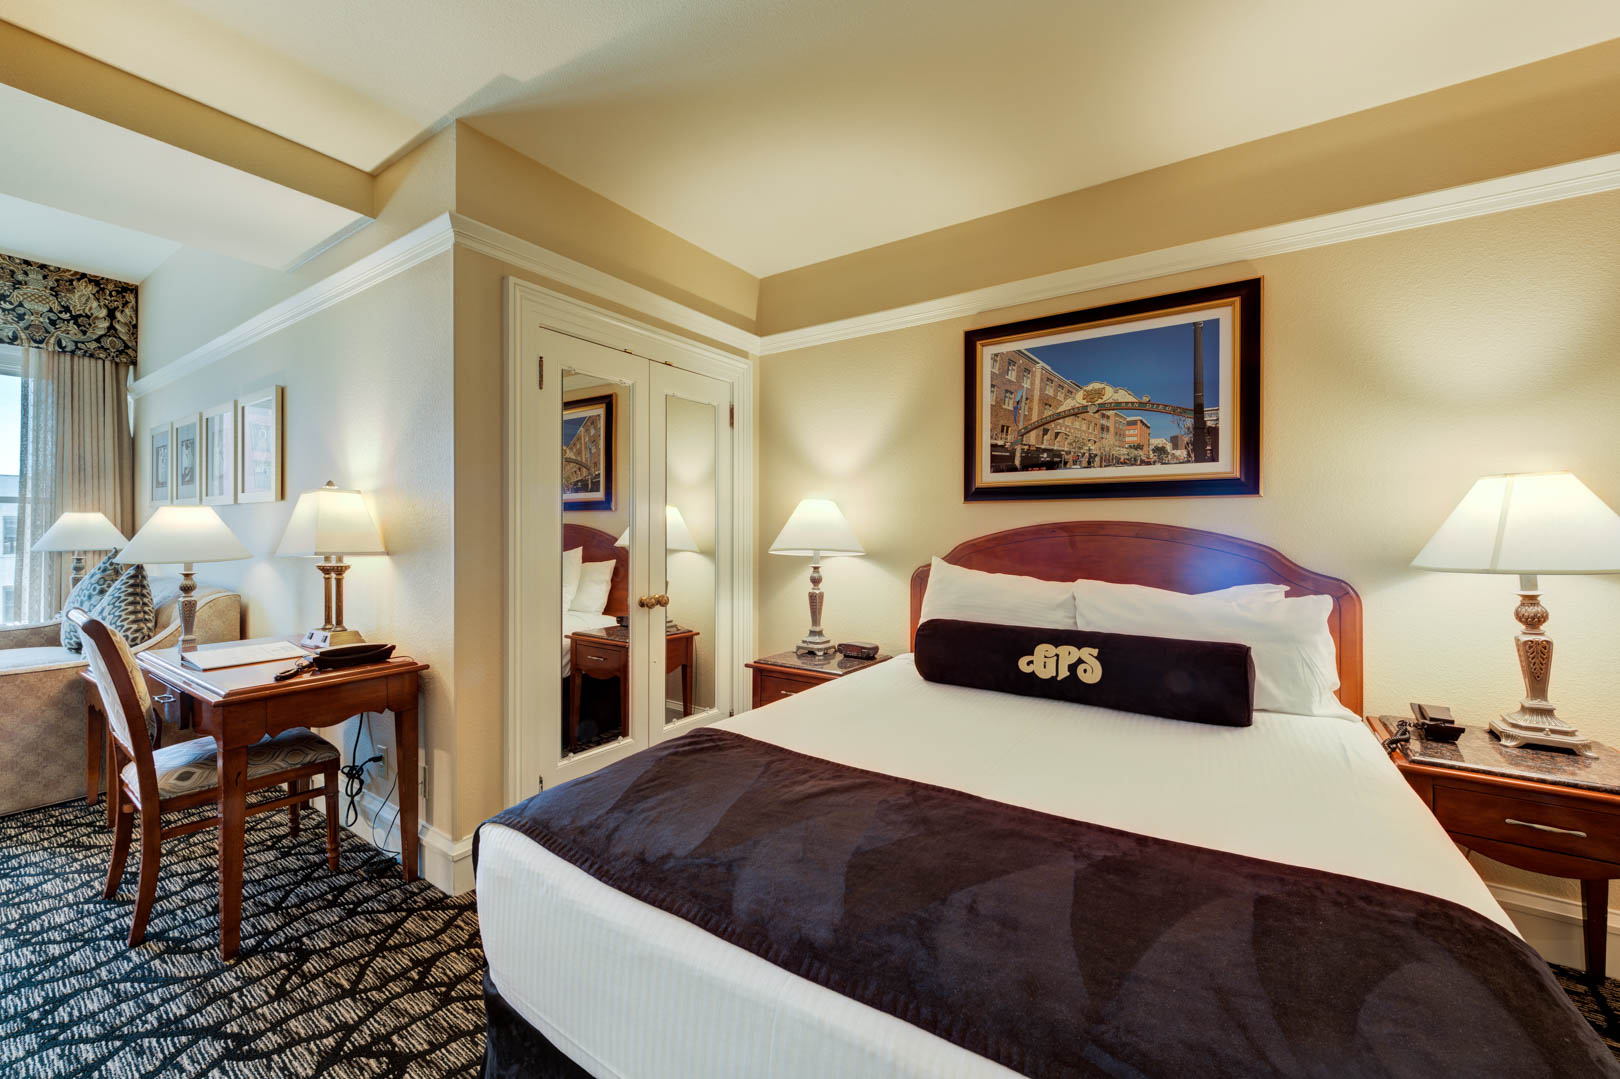 A charming master bedroom and living room area at VRI's Gaslamp Plaza Suites in San Diego, California.